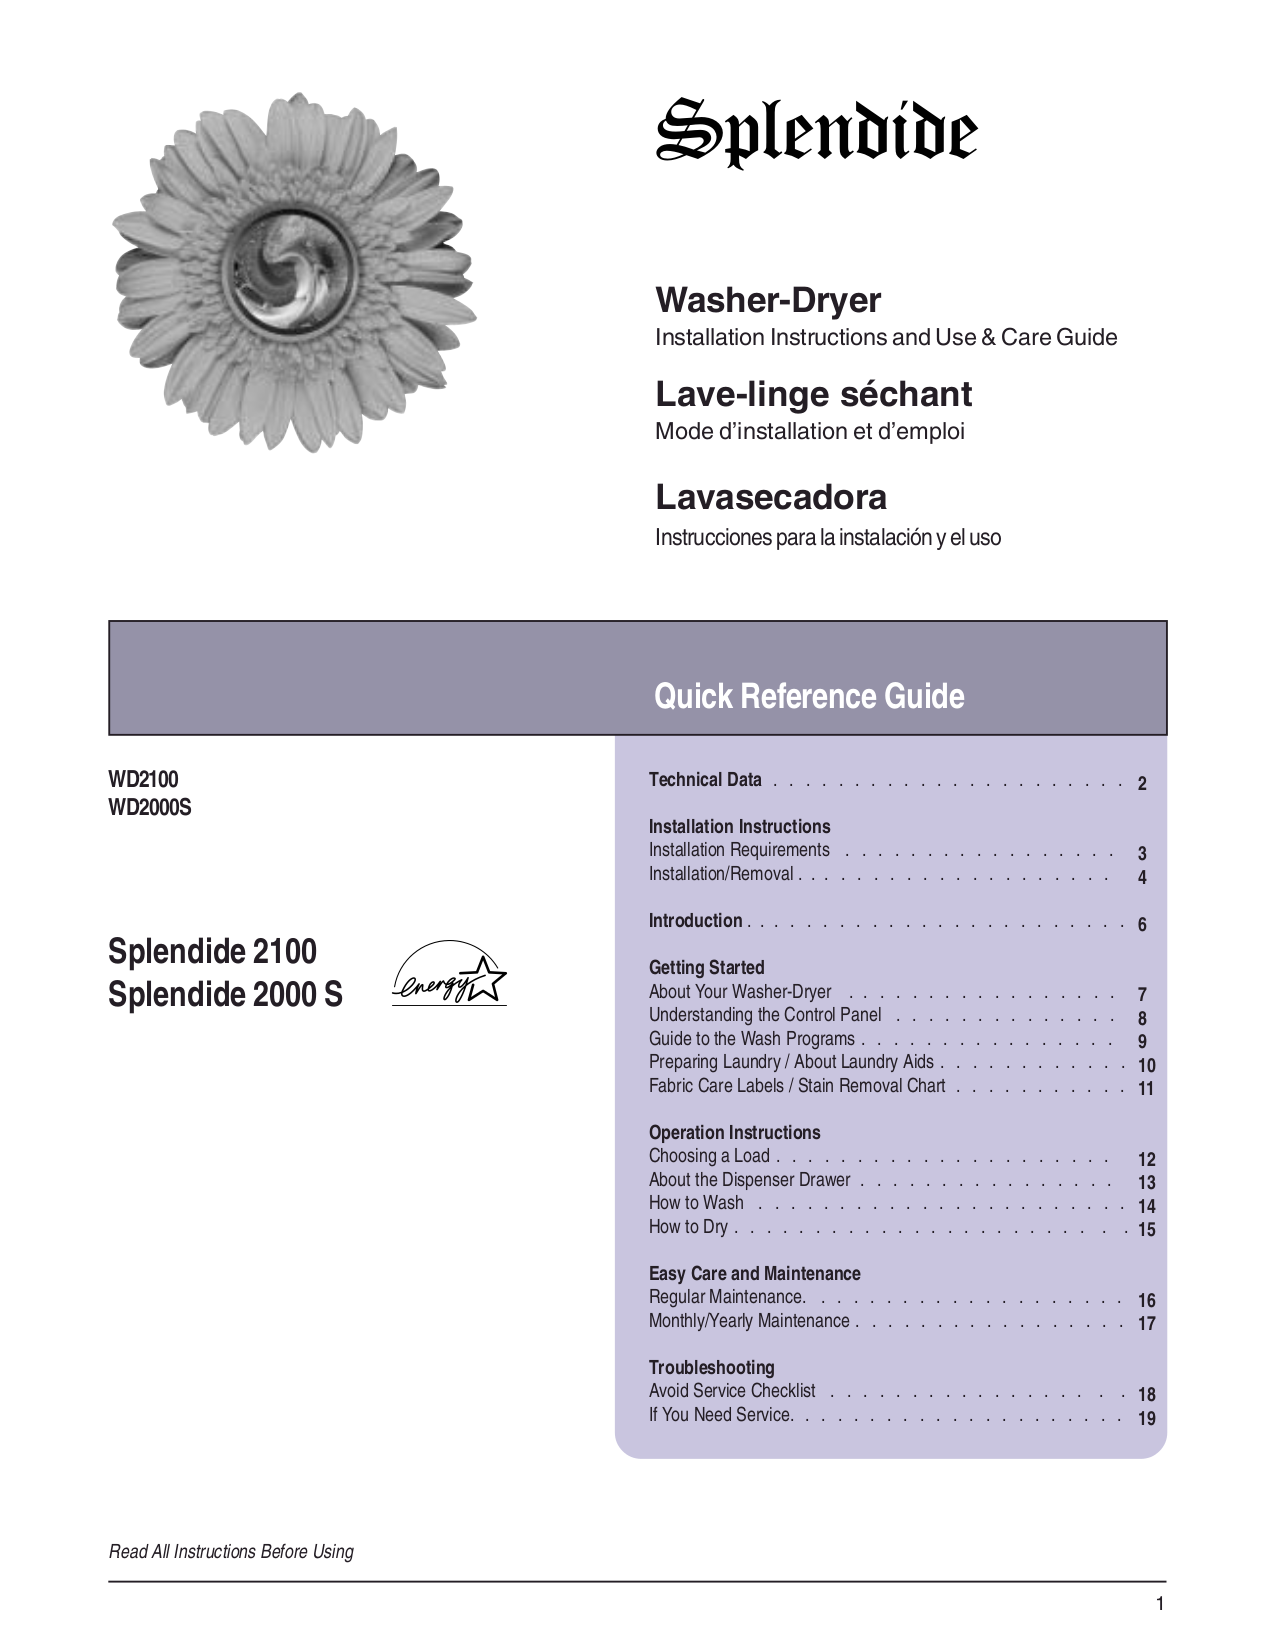 PDF manual for Splendide Other 2100 Washer-Dryers-Combo